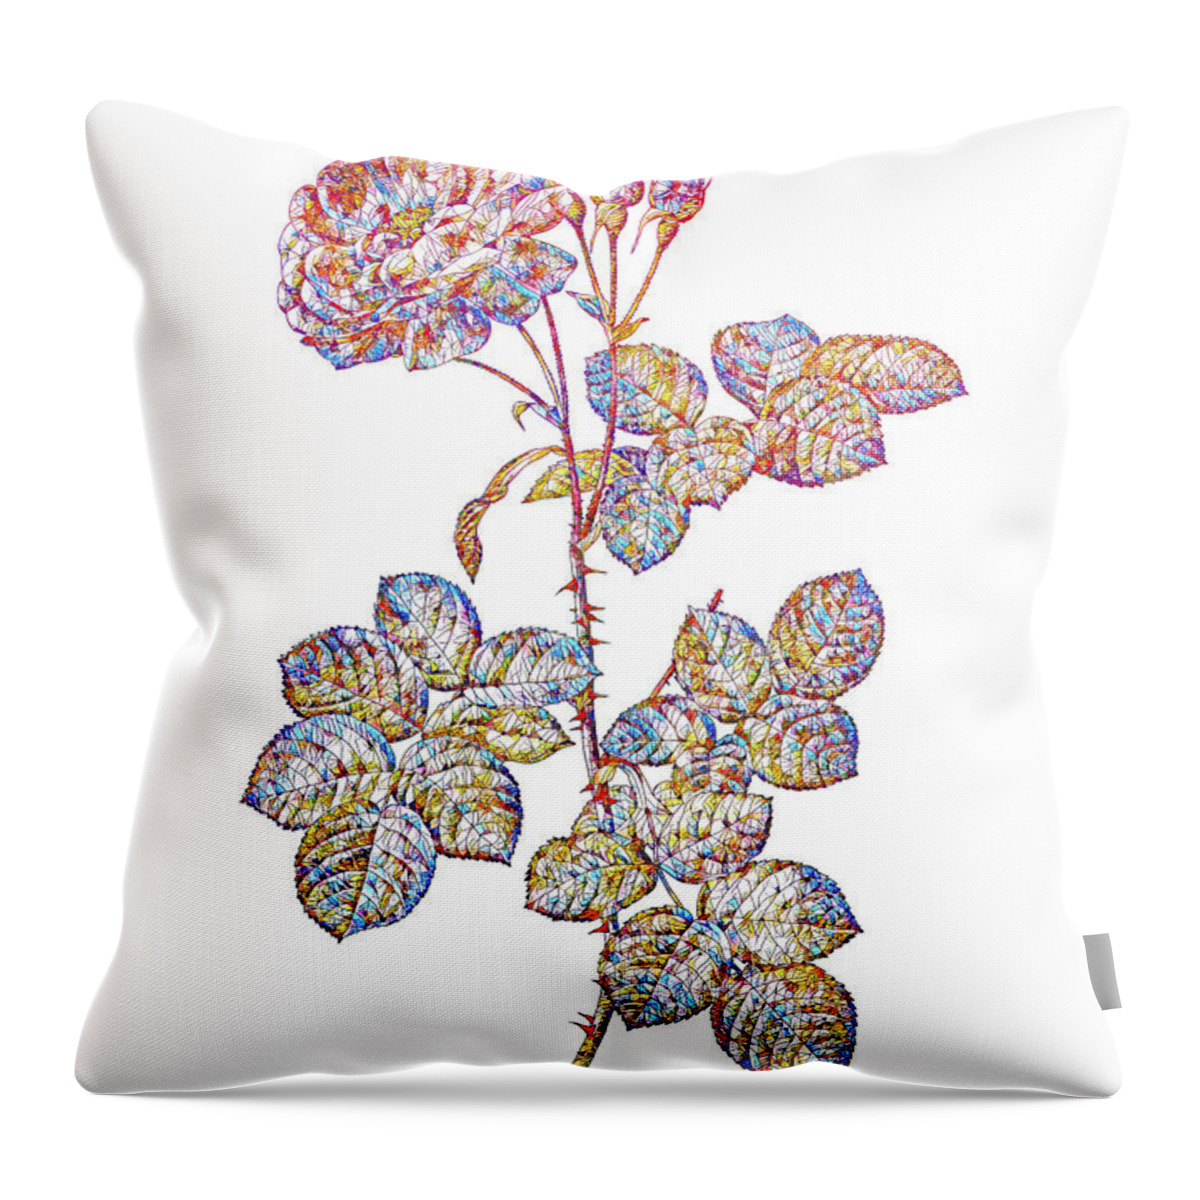 Holyrockarts Throw Pillow featuring the mixed media Stained Glass Damask Rose Botanical Art On White #1 by Holy Rock Design